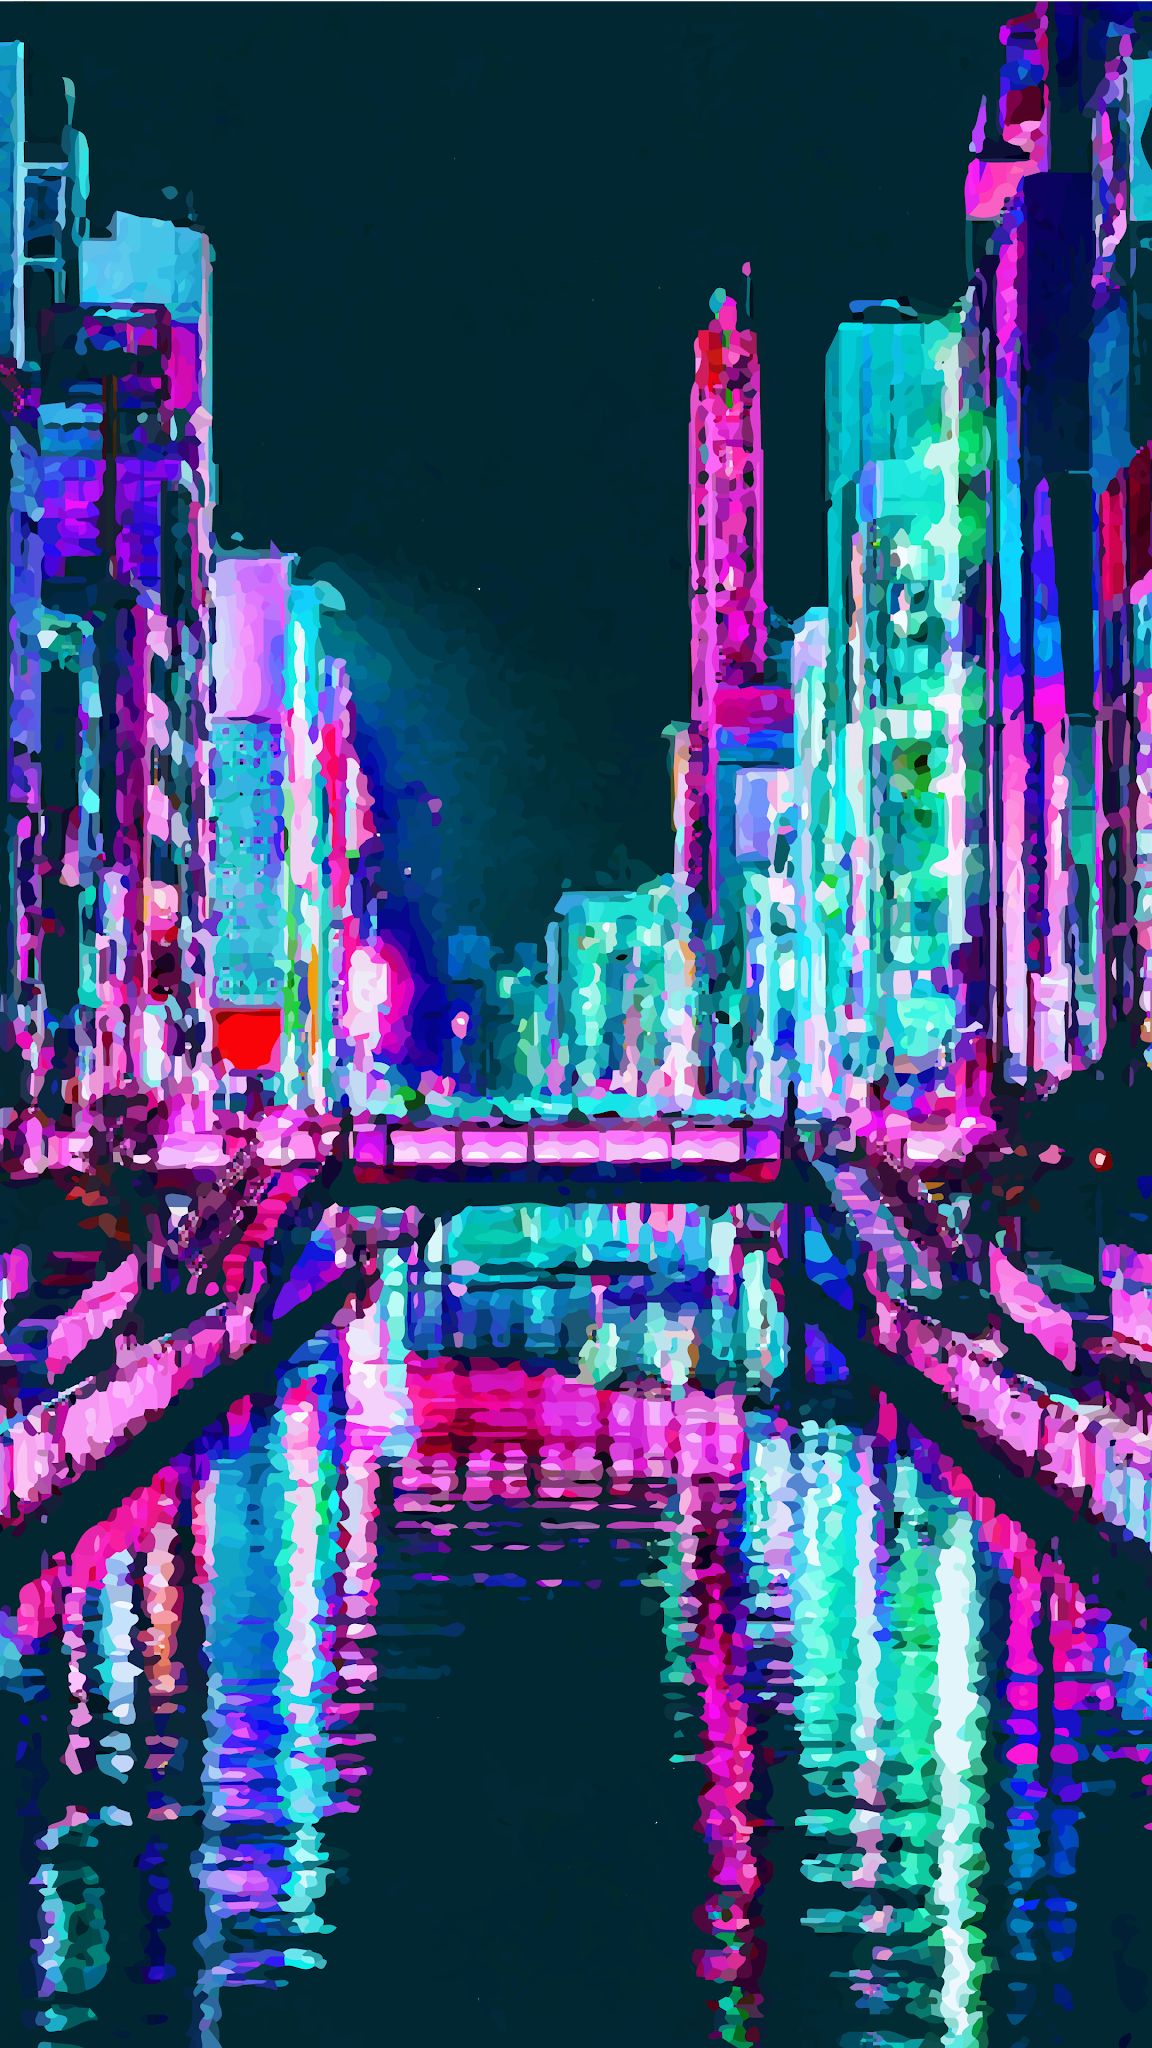 10 Choices wallpaper aesthetic tokyo You Can Use It For Free